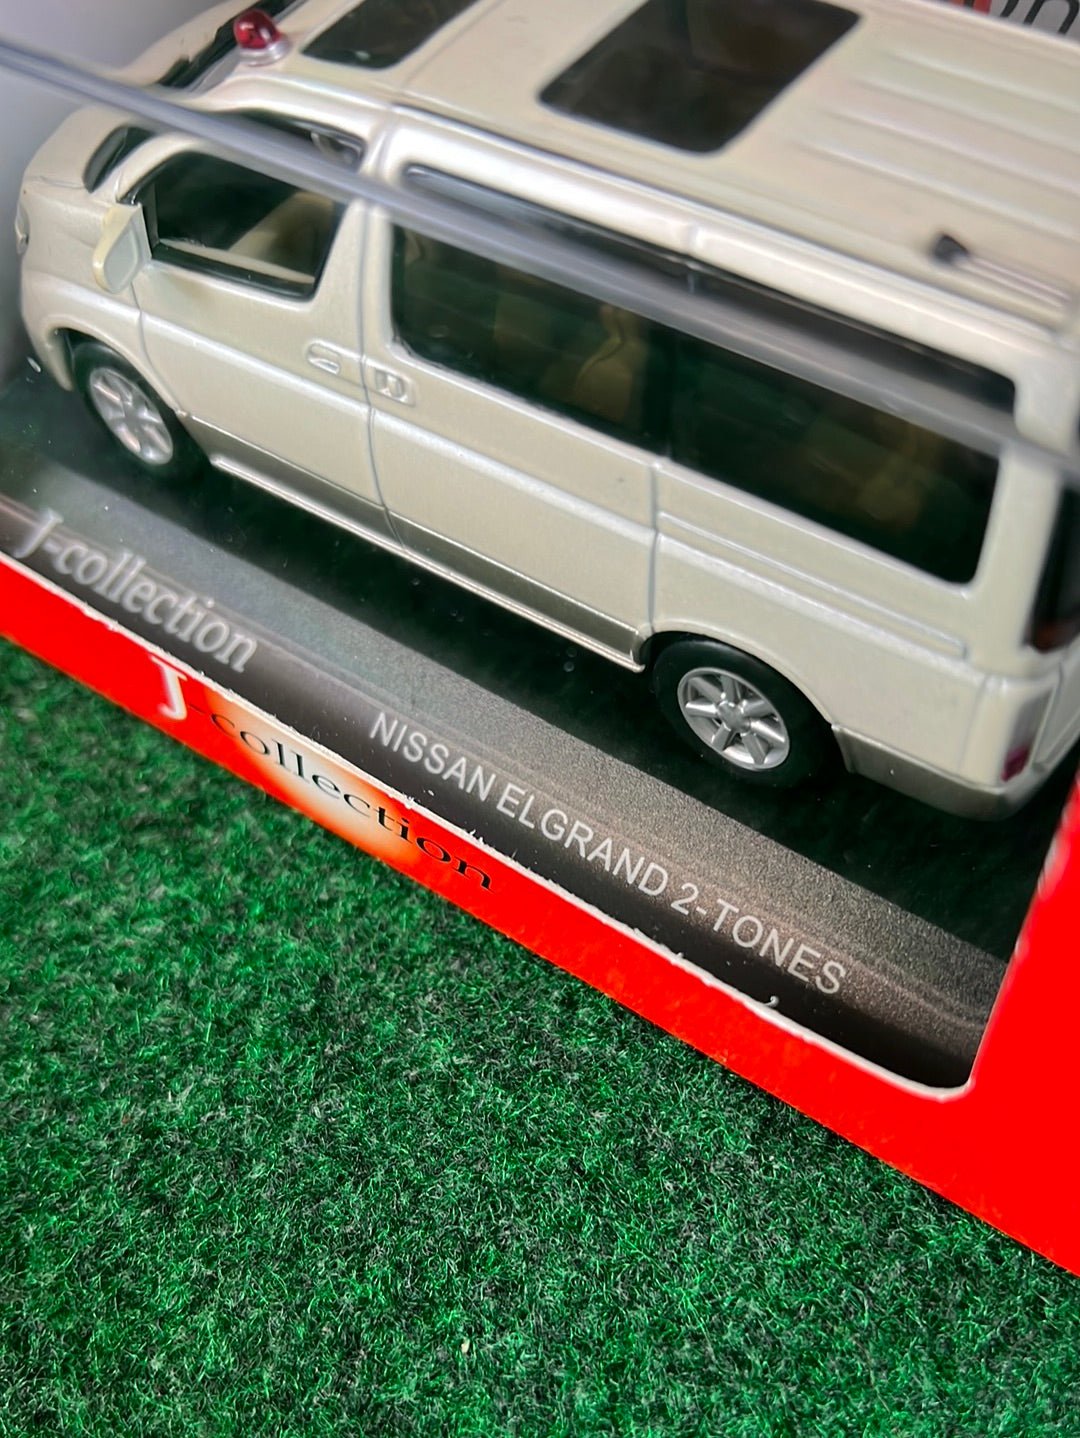 J-Collection (KYOSHO) Nissan Elgrand 2-Tones Van Modified 1/43 Scale Diecast